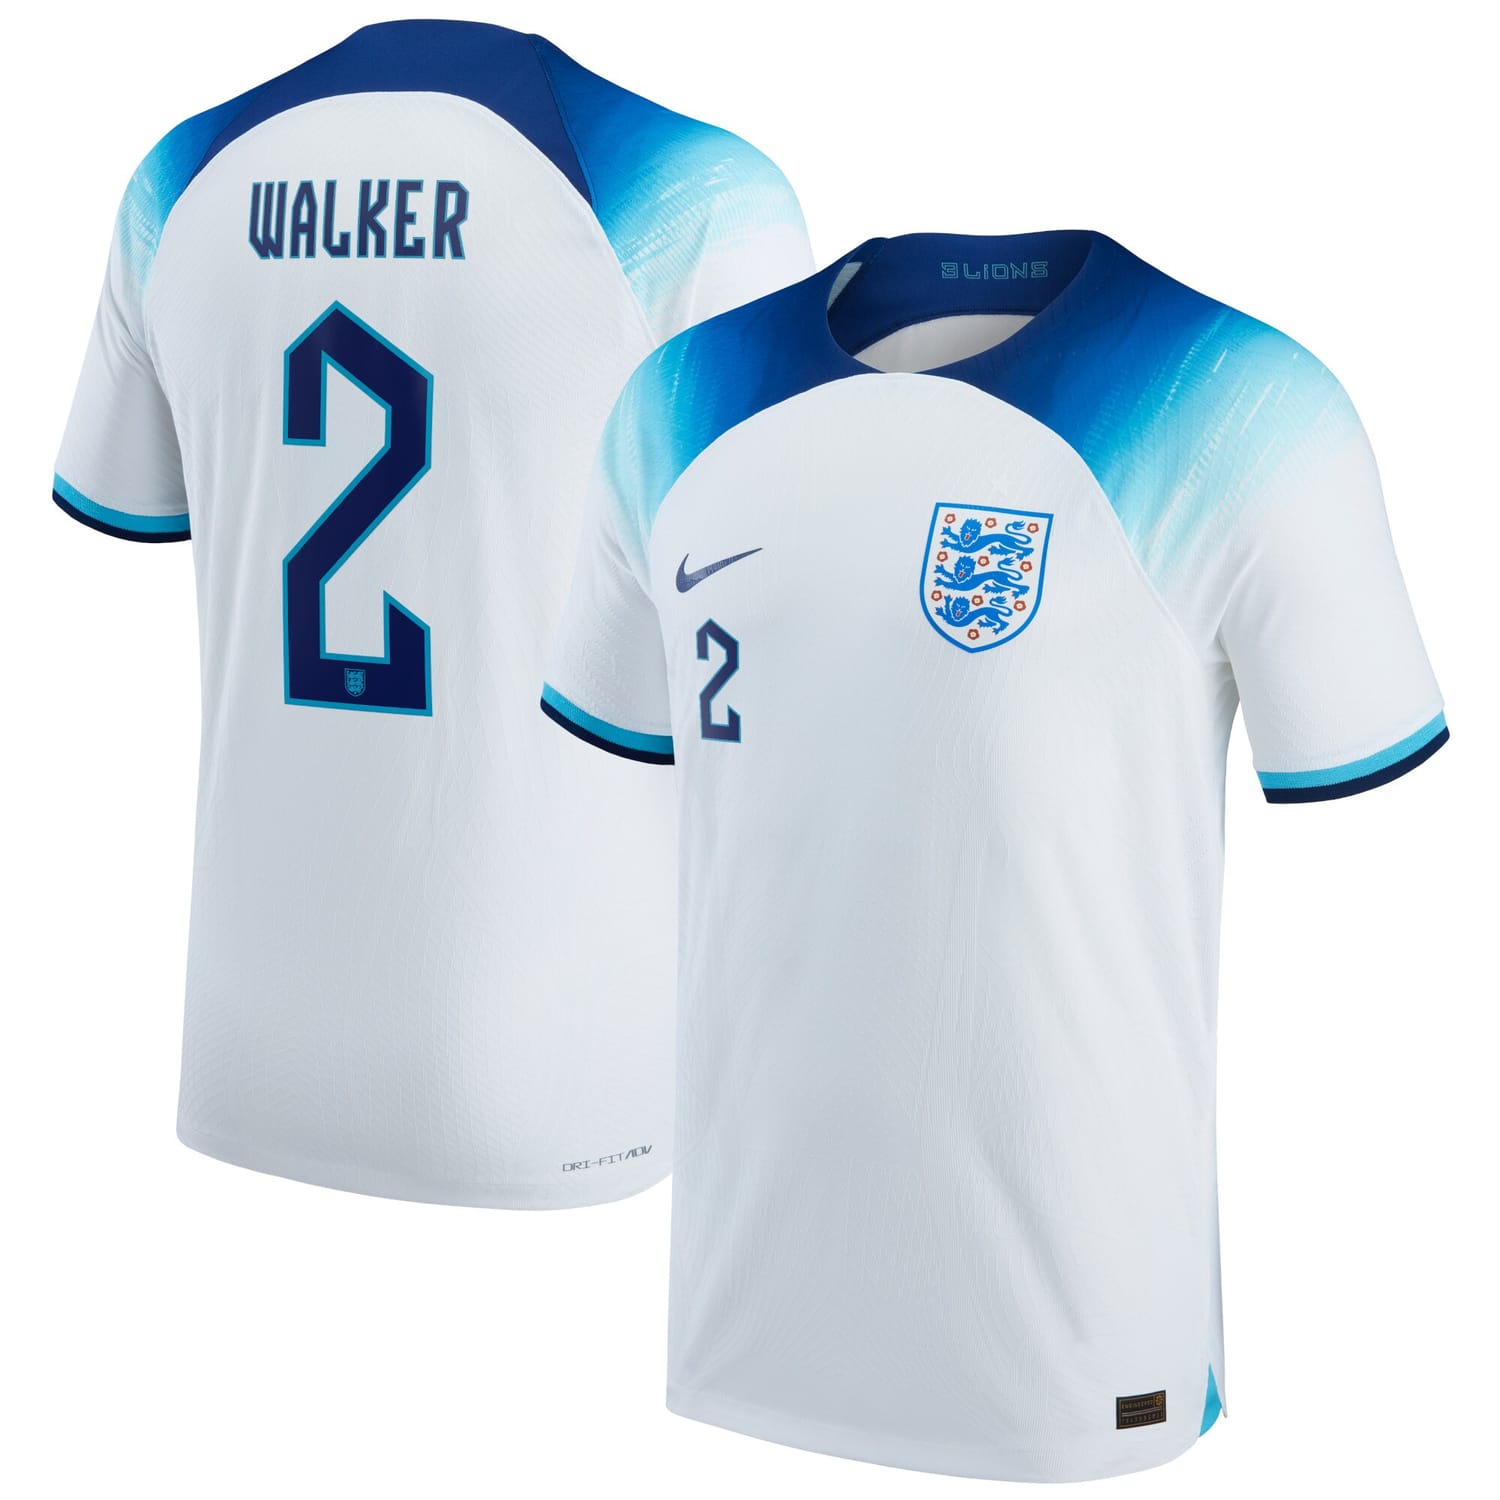 England National Team Home Authentic Jersey Shirt 2022 player Kyle Walker 2 printing for Men